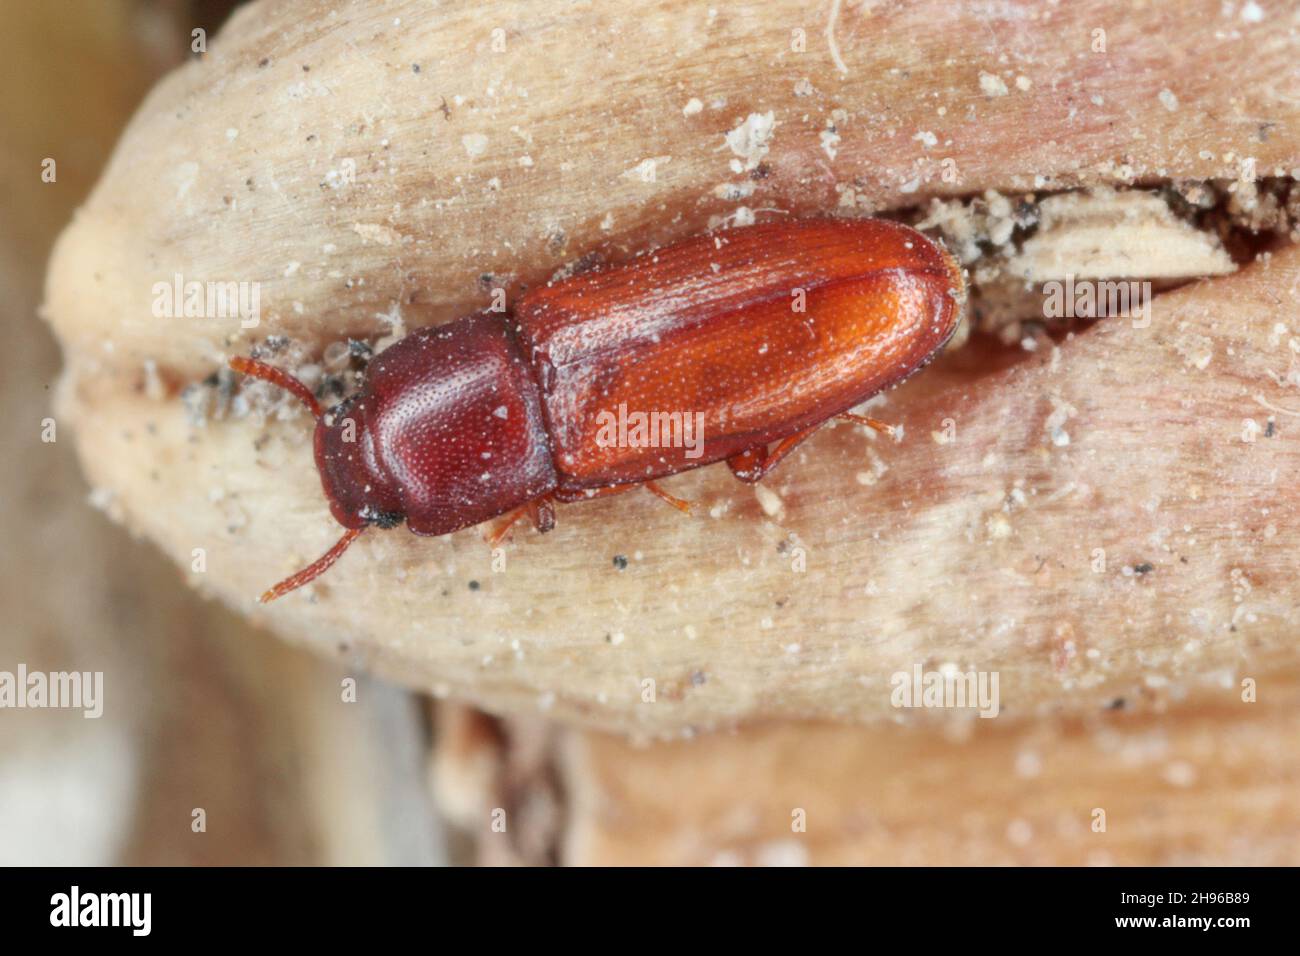 Palorus subdepressus is a species of beetle in the family Tenebrionidae, the darkling beetles. Beetle on wheat grain. Stock Photo